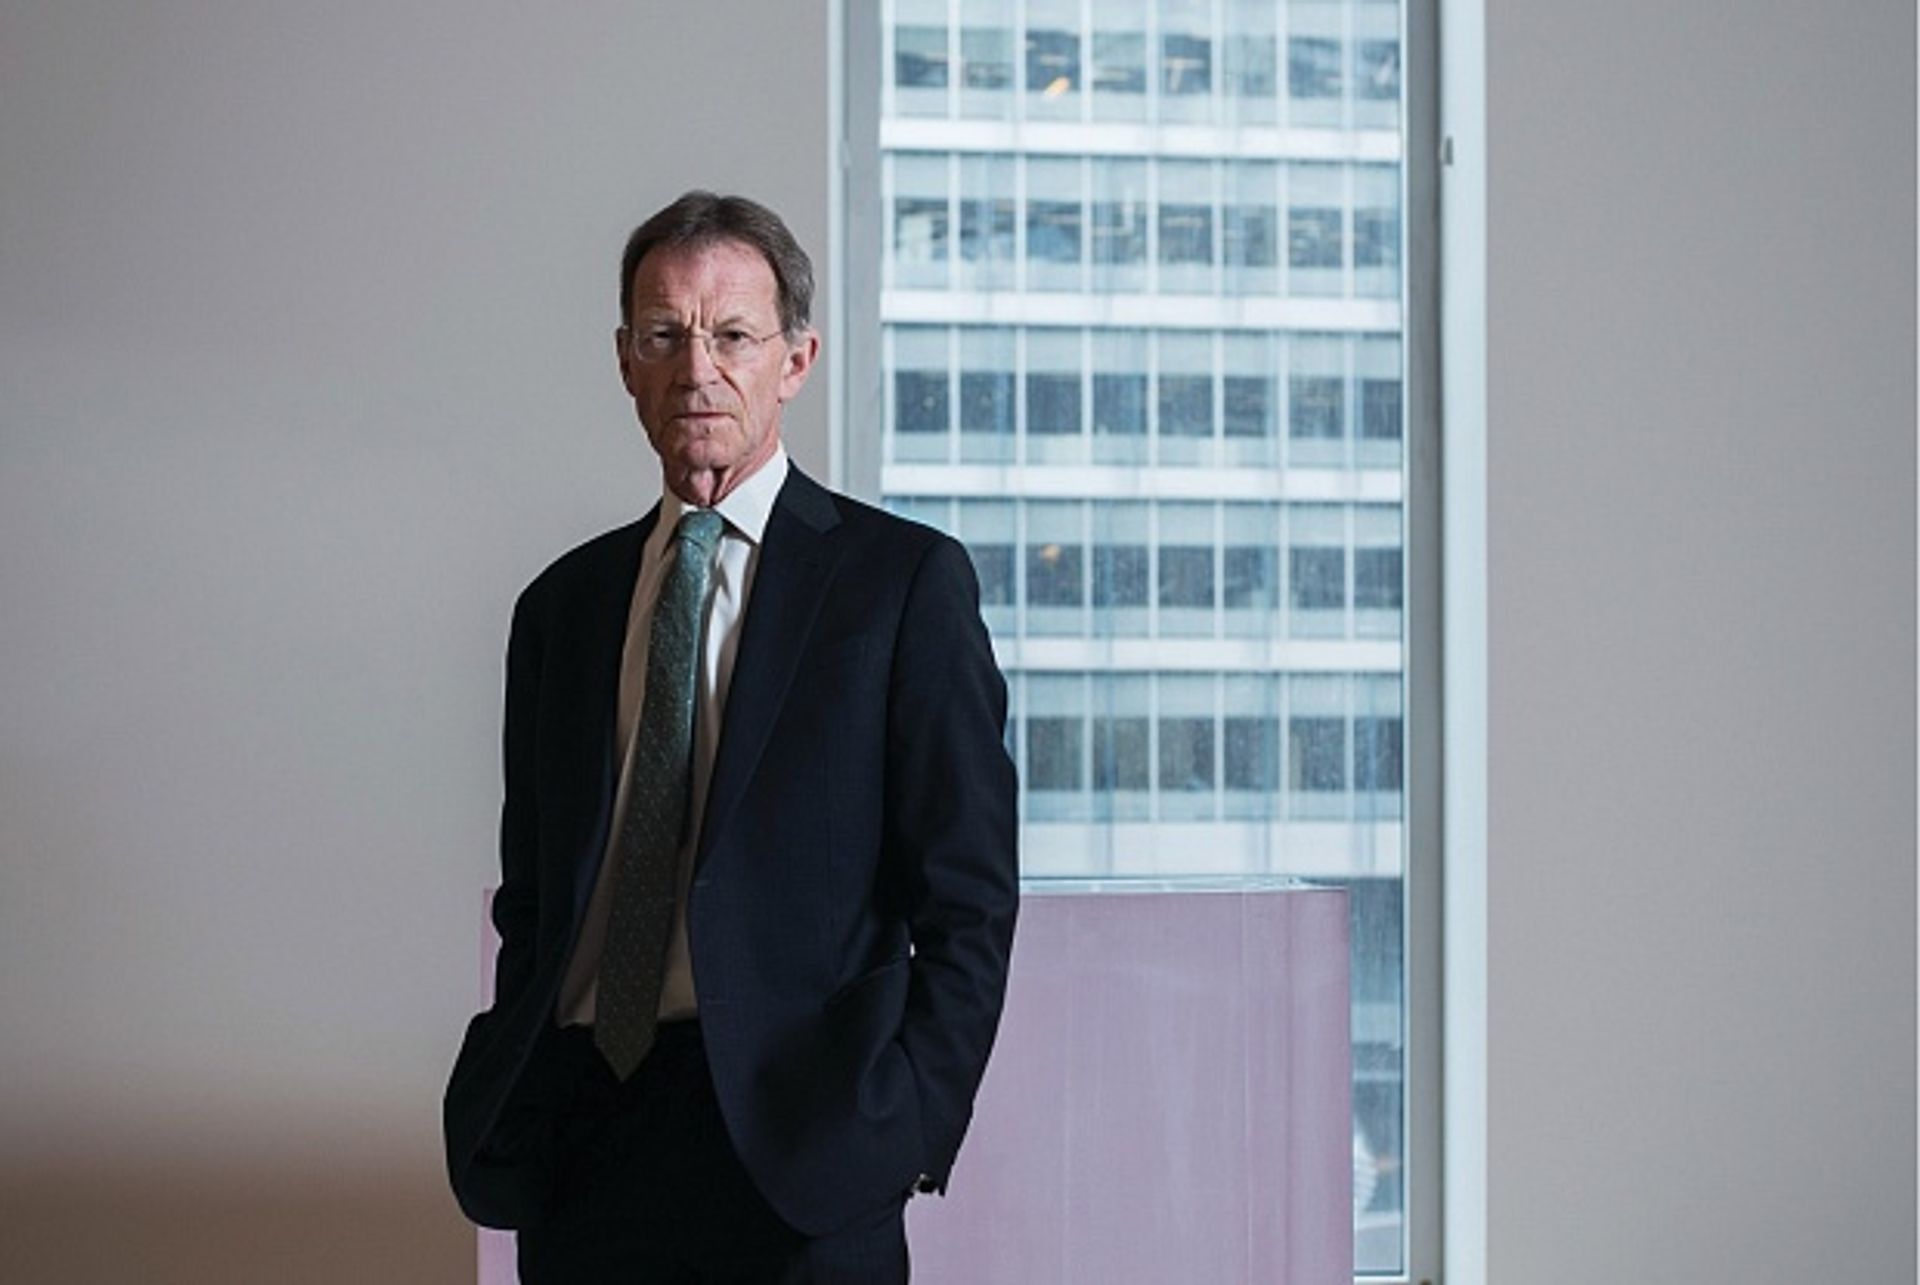 Nicholas Serota in front of a Roni Horn sculpture in the Tate’s new galleries Photo: Hugo Glendinning, 2016